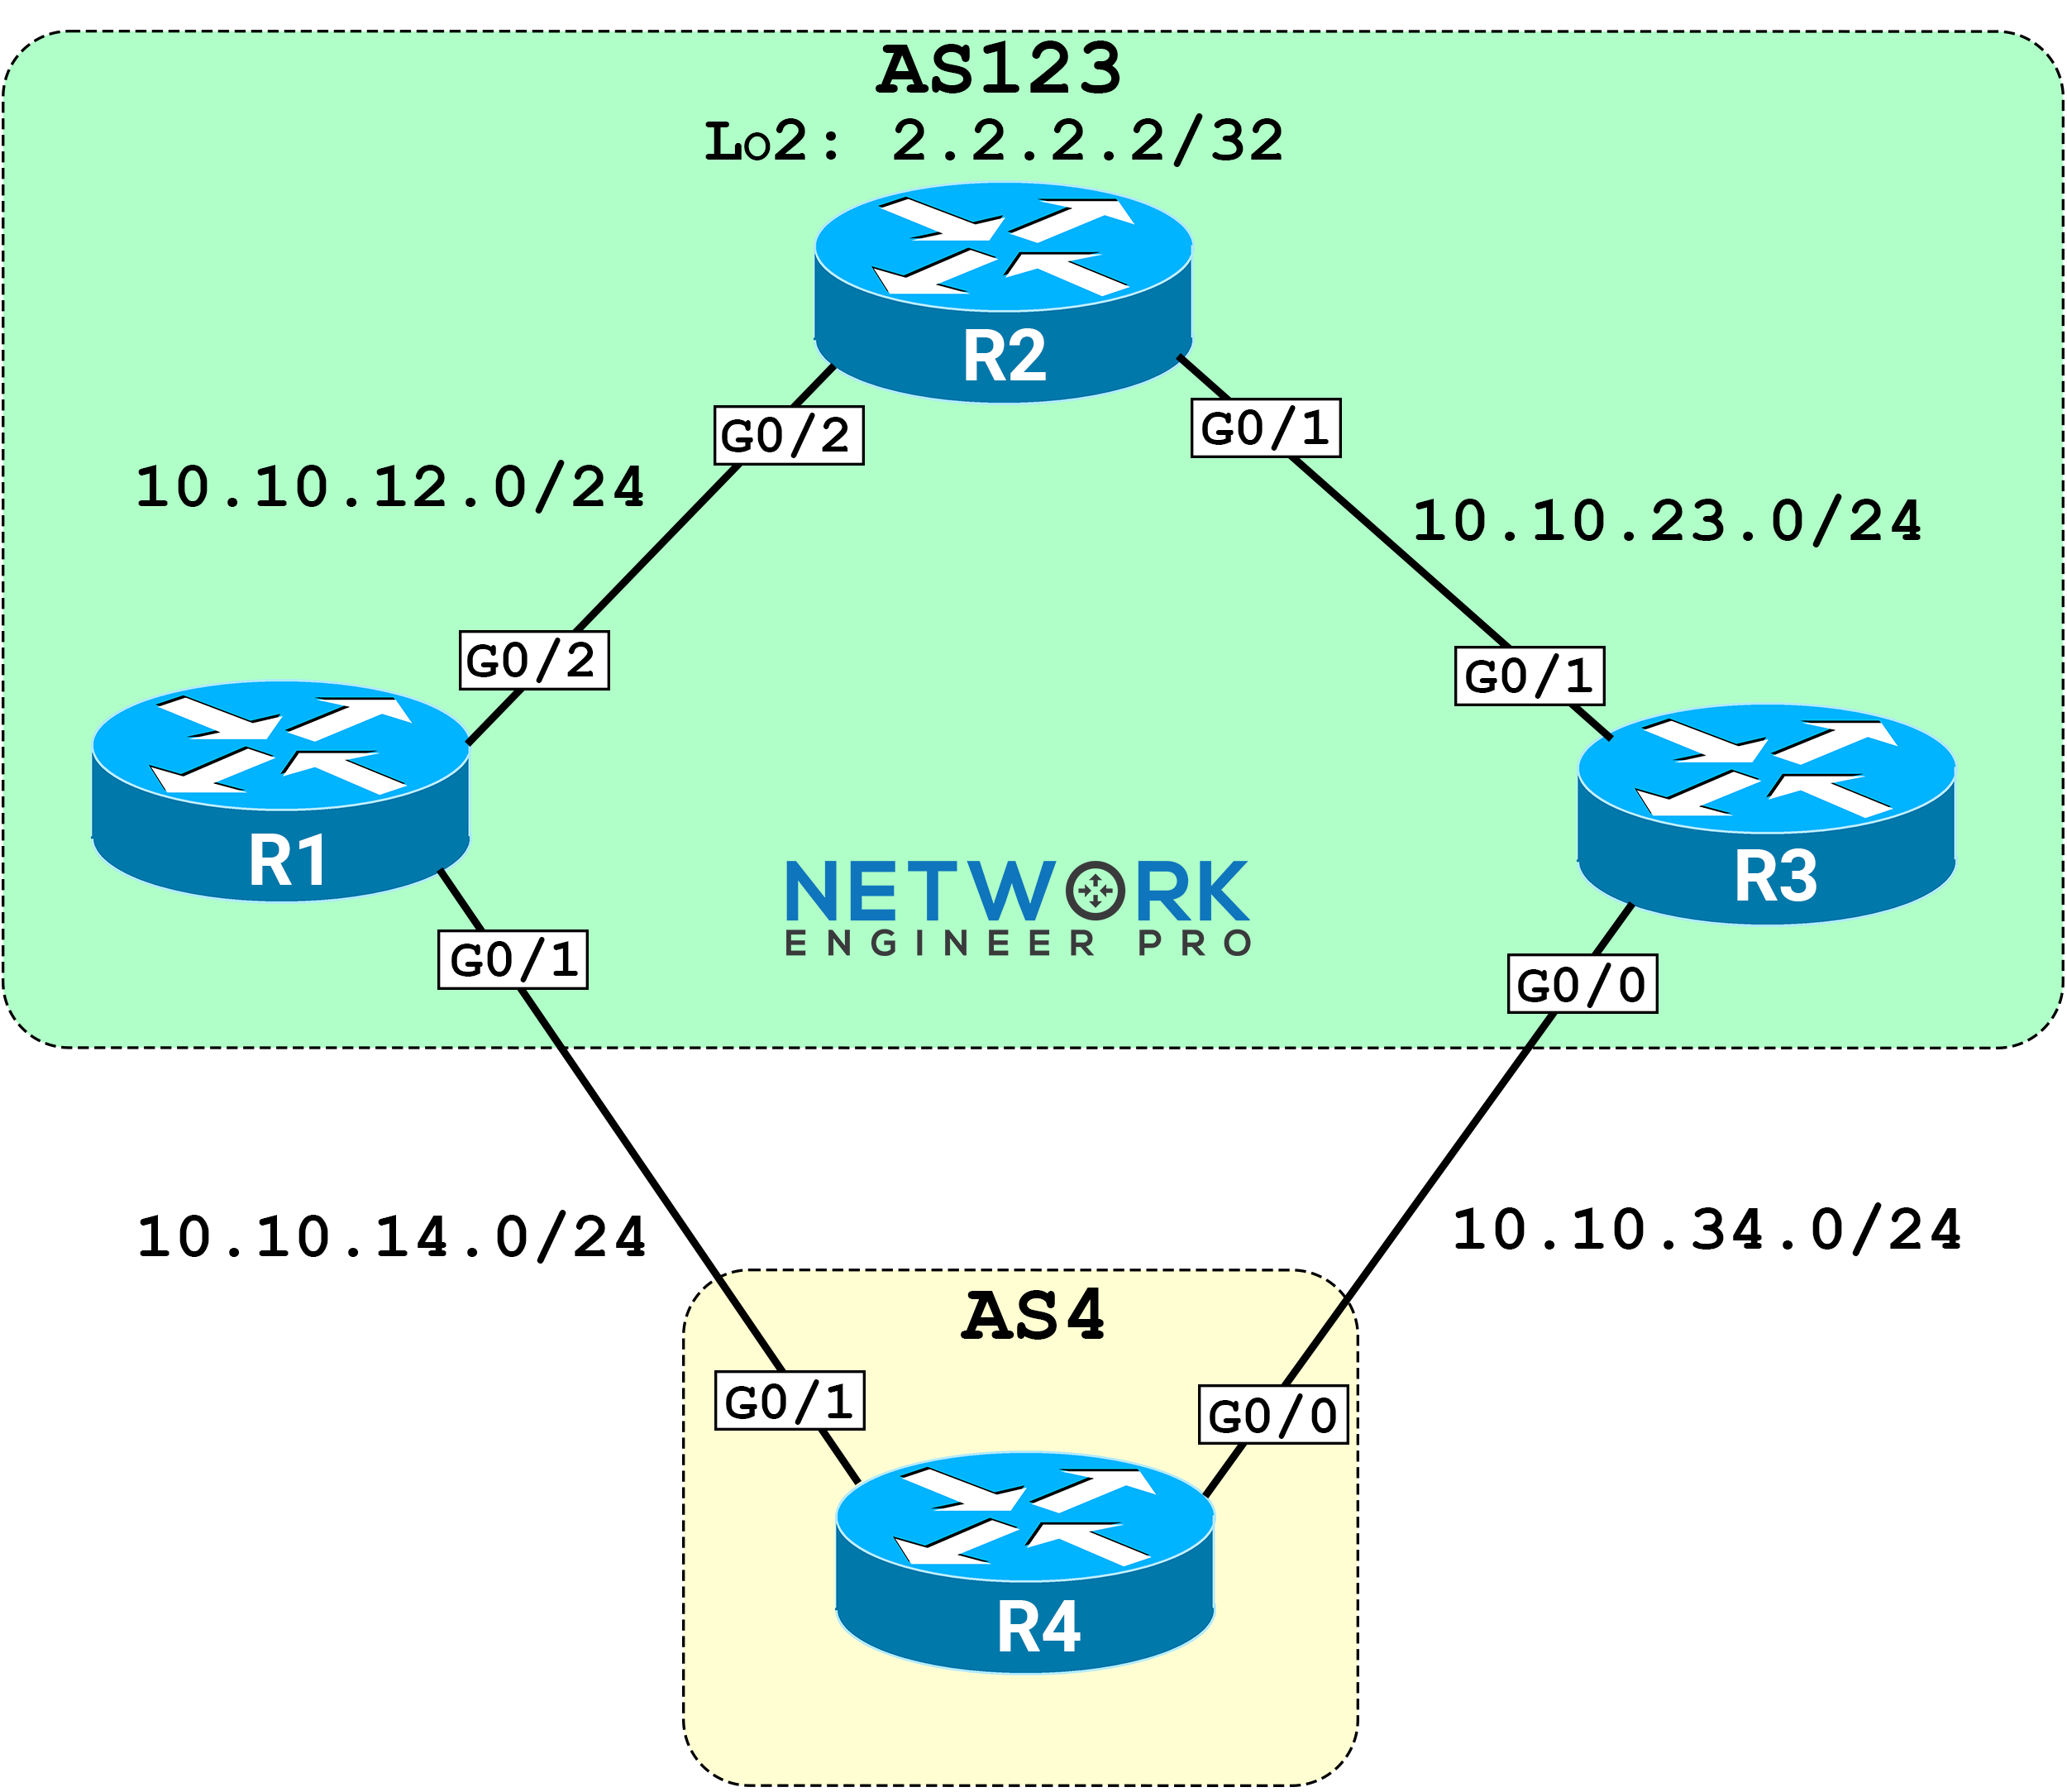 Network topology diagram for BGP MED tutorial showing R4 in AS4 and R1, R2, R3 in AS123 with iBGP and eBGP connections.